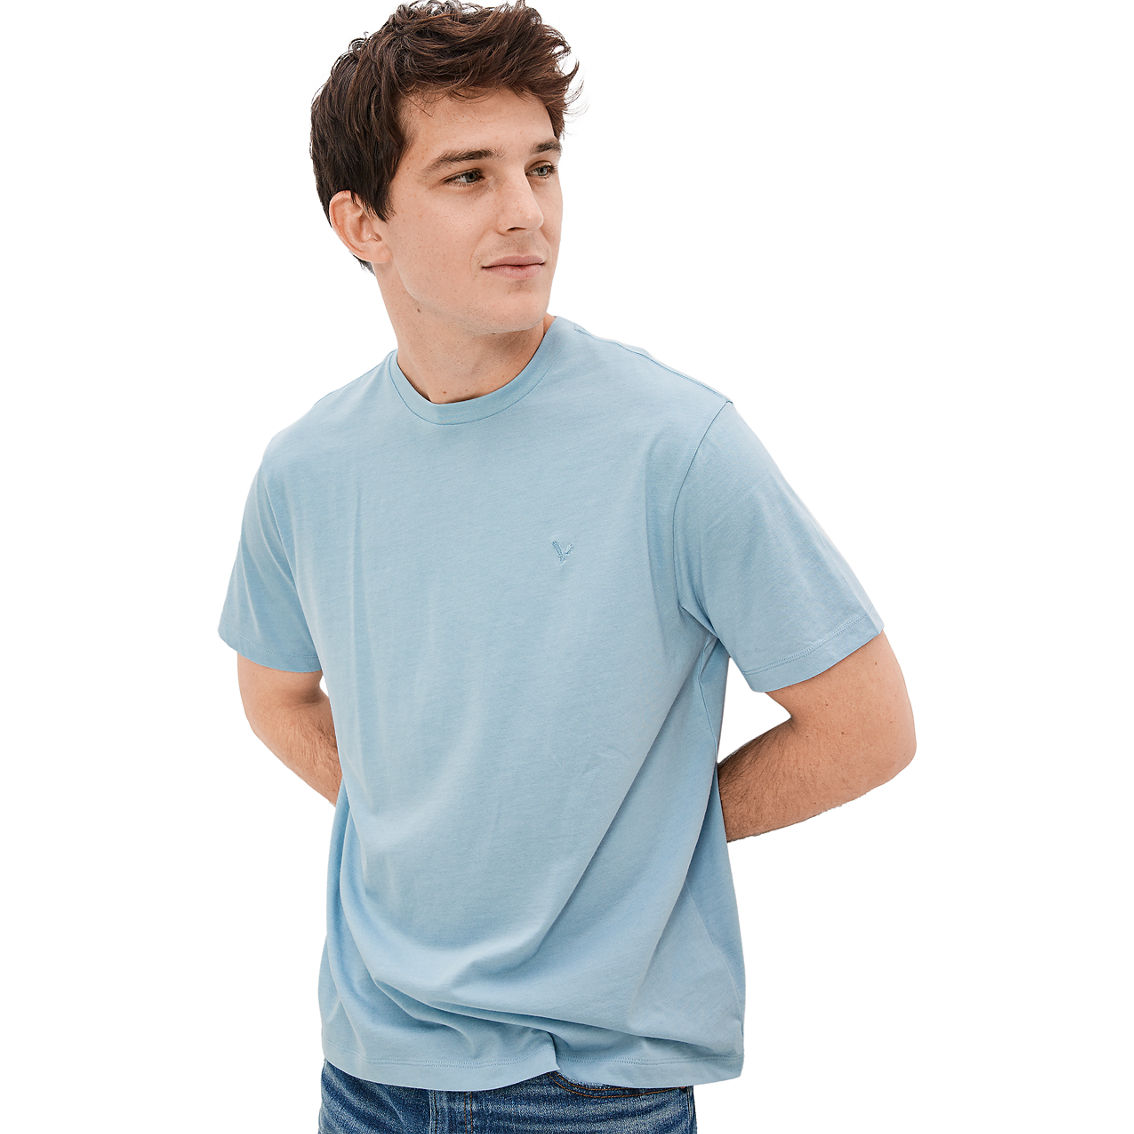 American Eagle Super Soft Legend Tee | Shirts | Clothing & Accessories ...